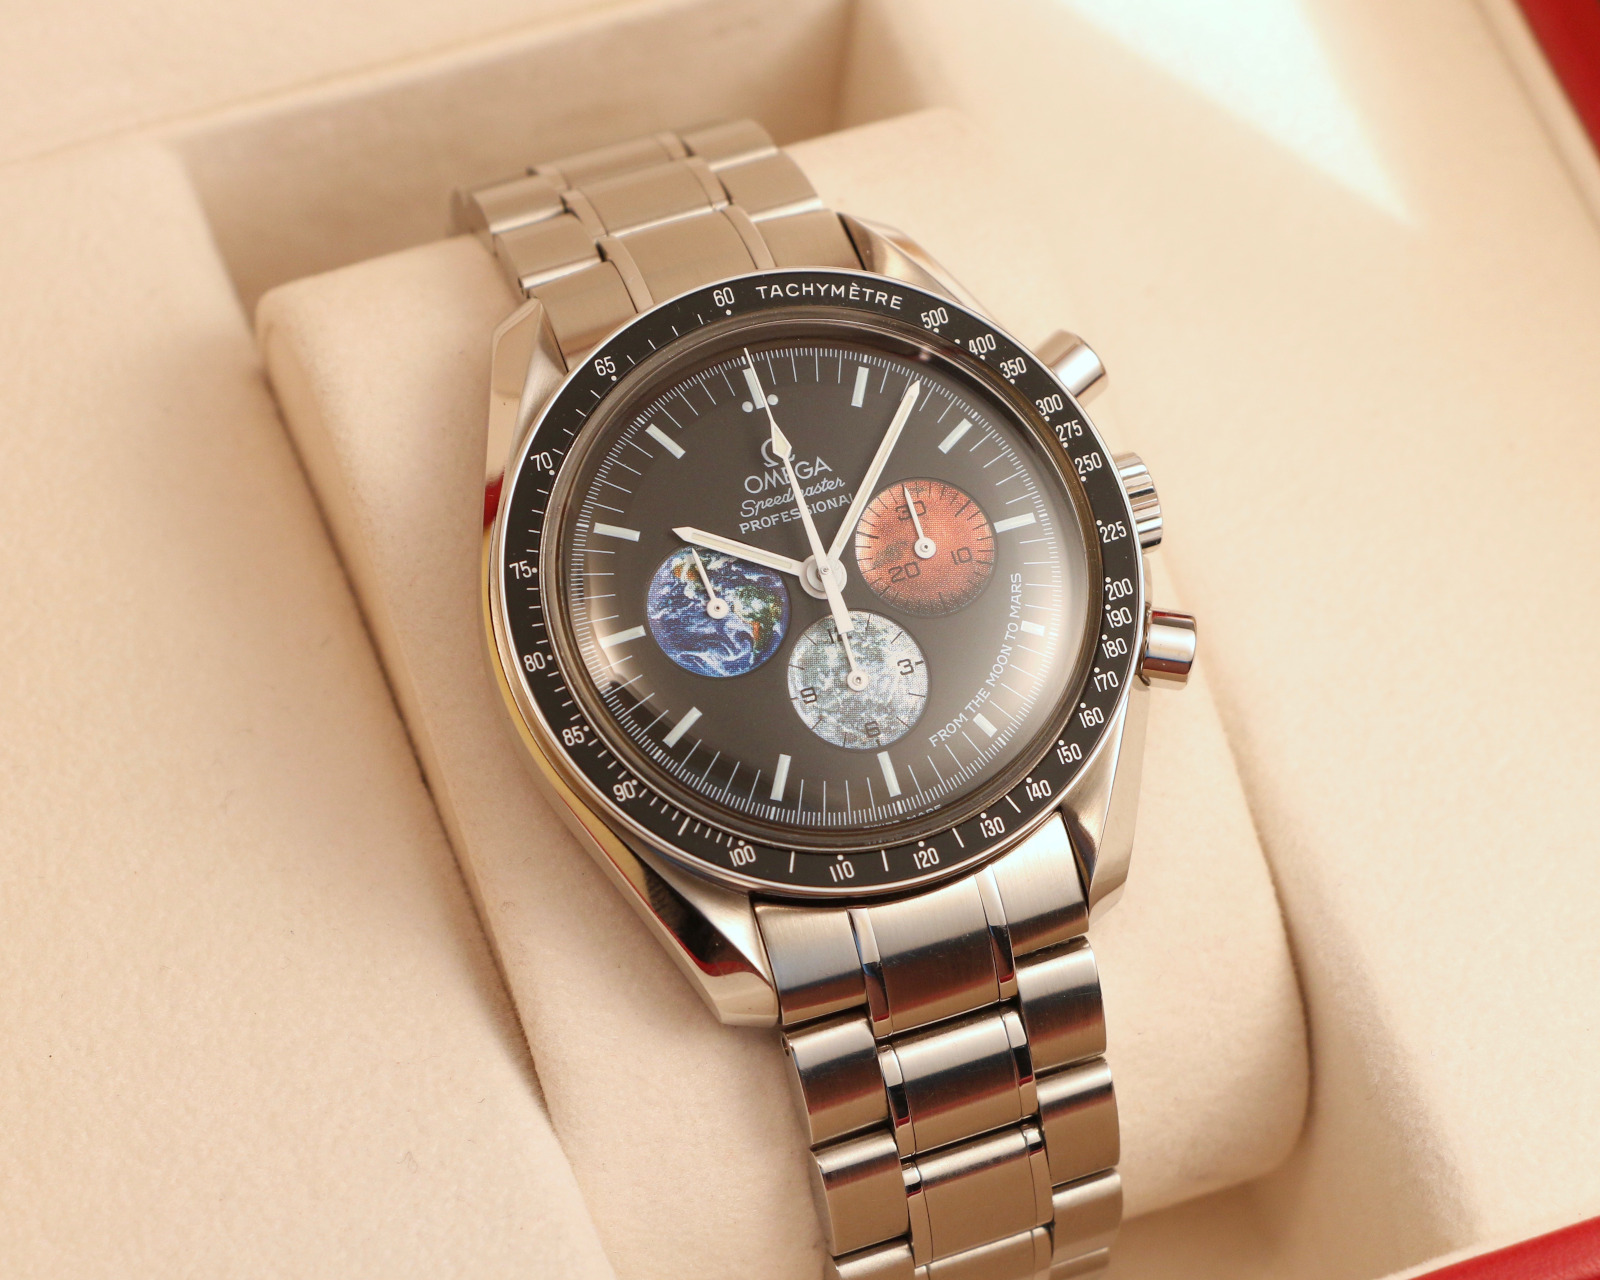 Rare Omega Speedmaster “From The Moon To Mars” ref. 3577.50.00 